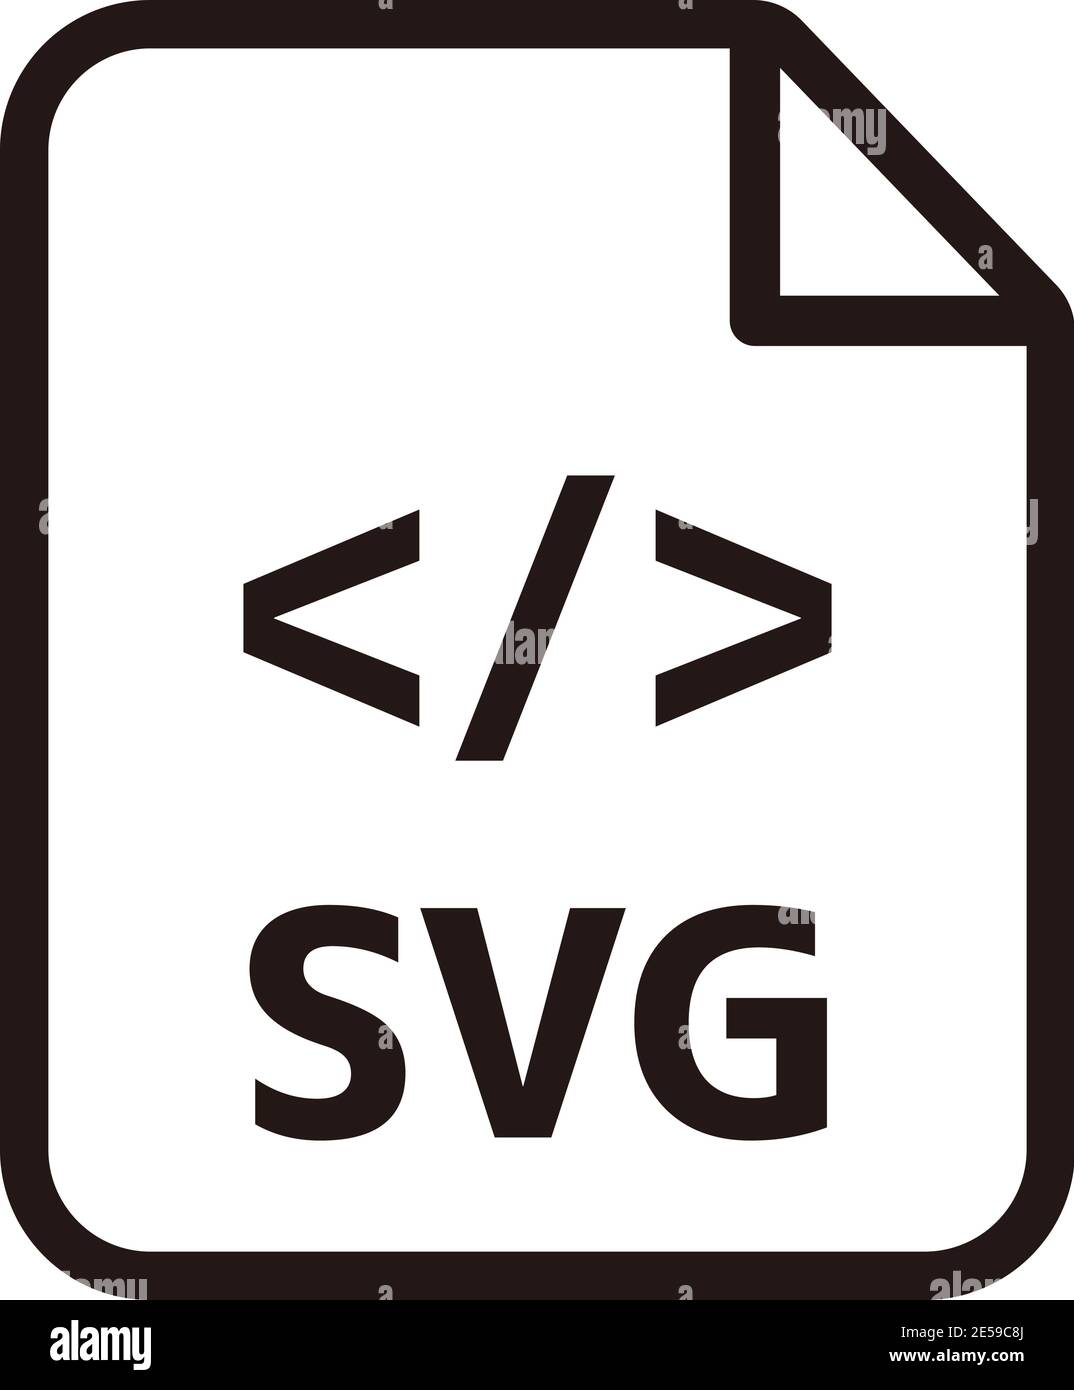 Svg File High Resolution Stock Photography and Images   Alamy